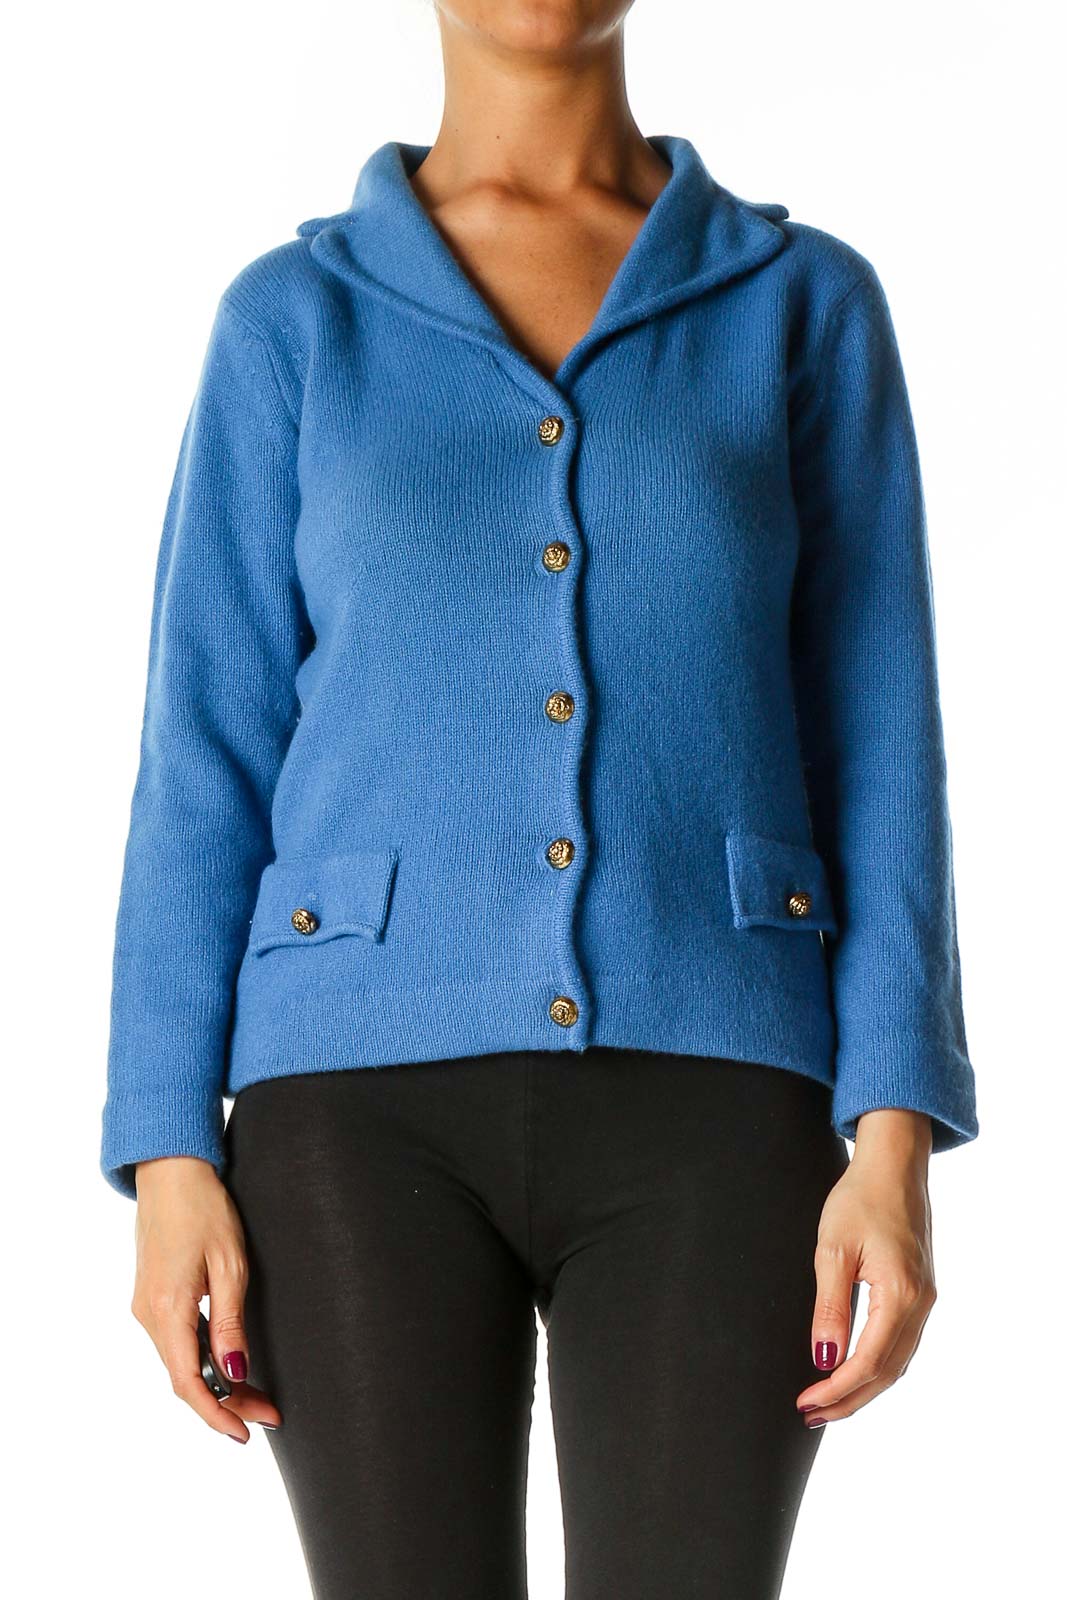 Blue Textured Cardigan Front